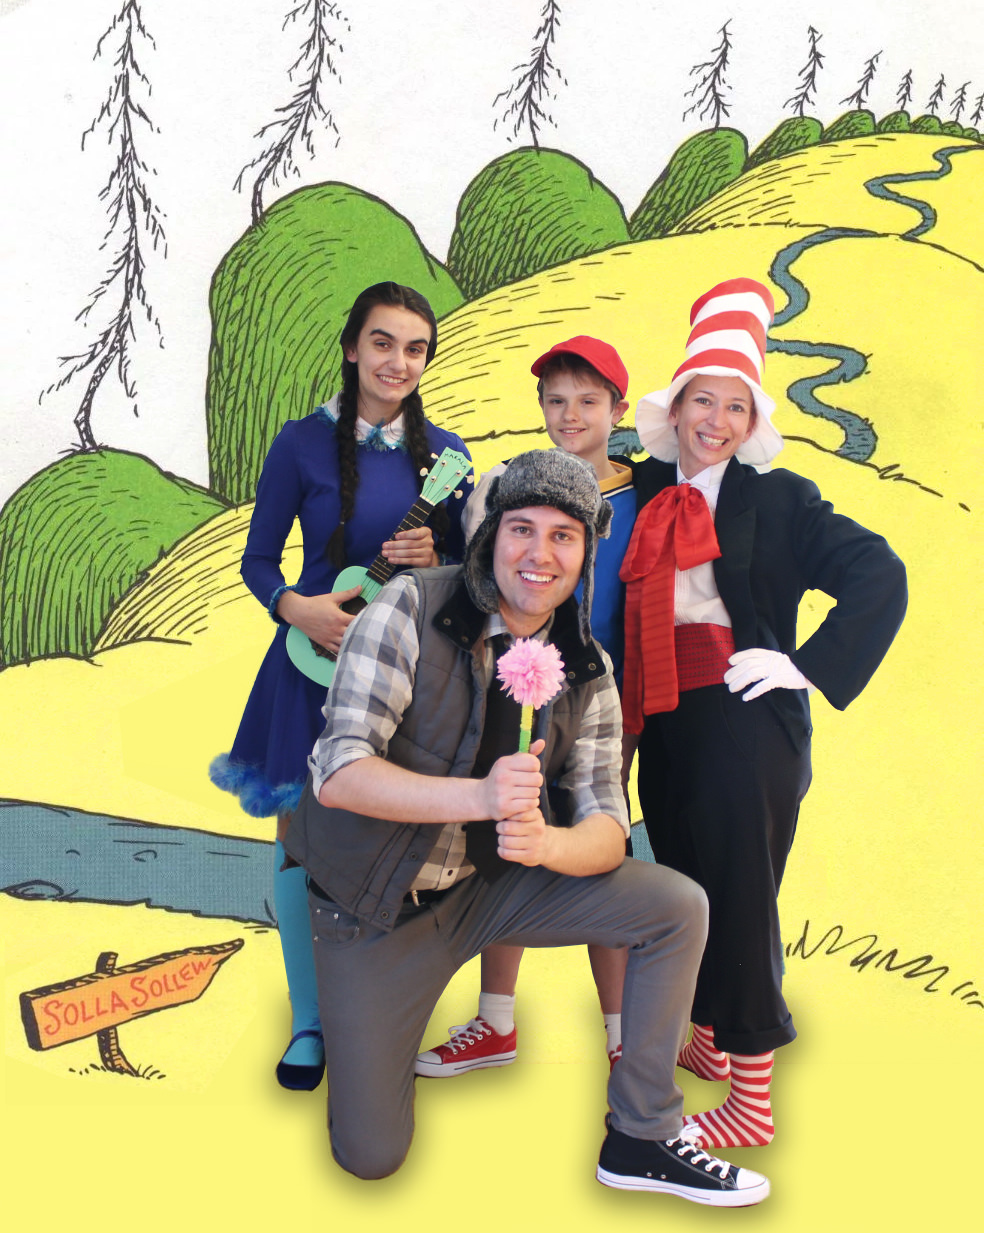 Your cast of Seussical includes (Pictured Left to Right): Emily Goulette as Gertrude McFuzz; Adam P. Blais as Horton the Elephant; Andrew Lyndaker as Jojo; and Rebecca Singer as The Cat in the Hat! 